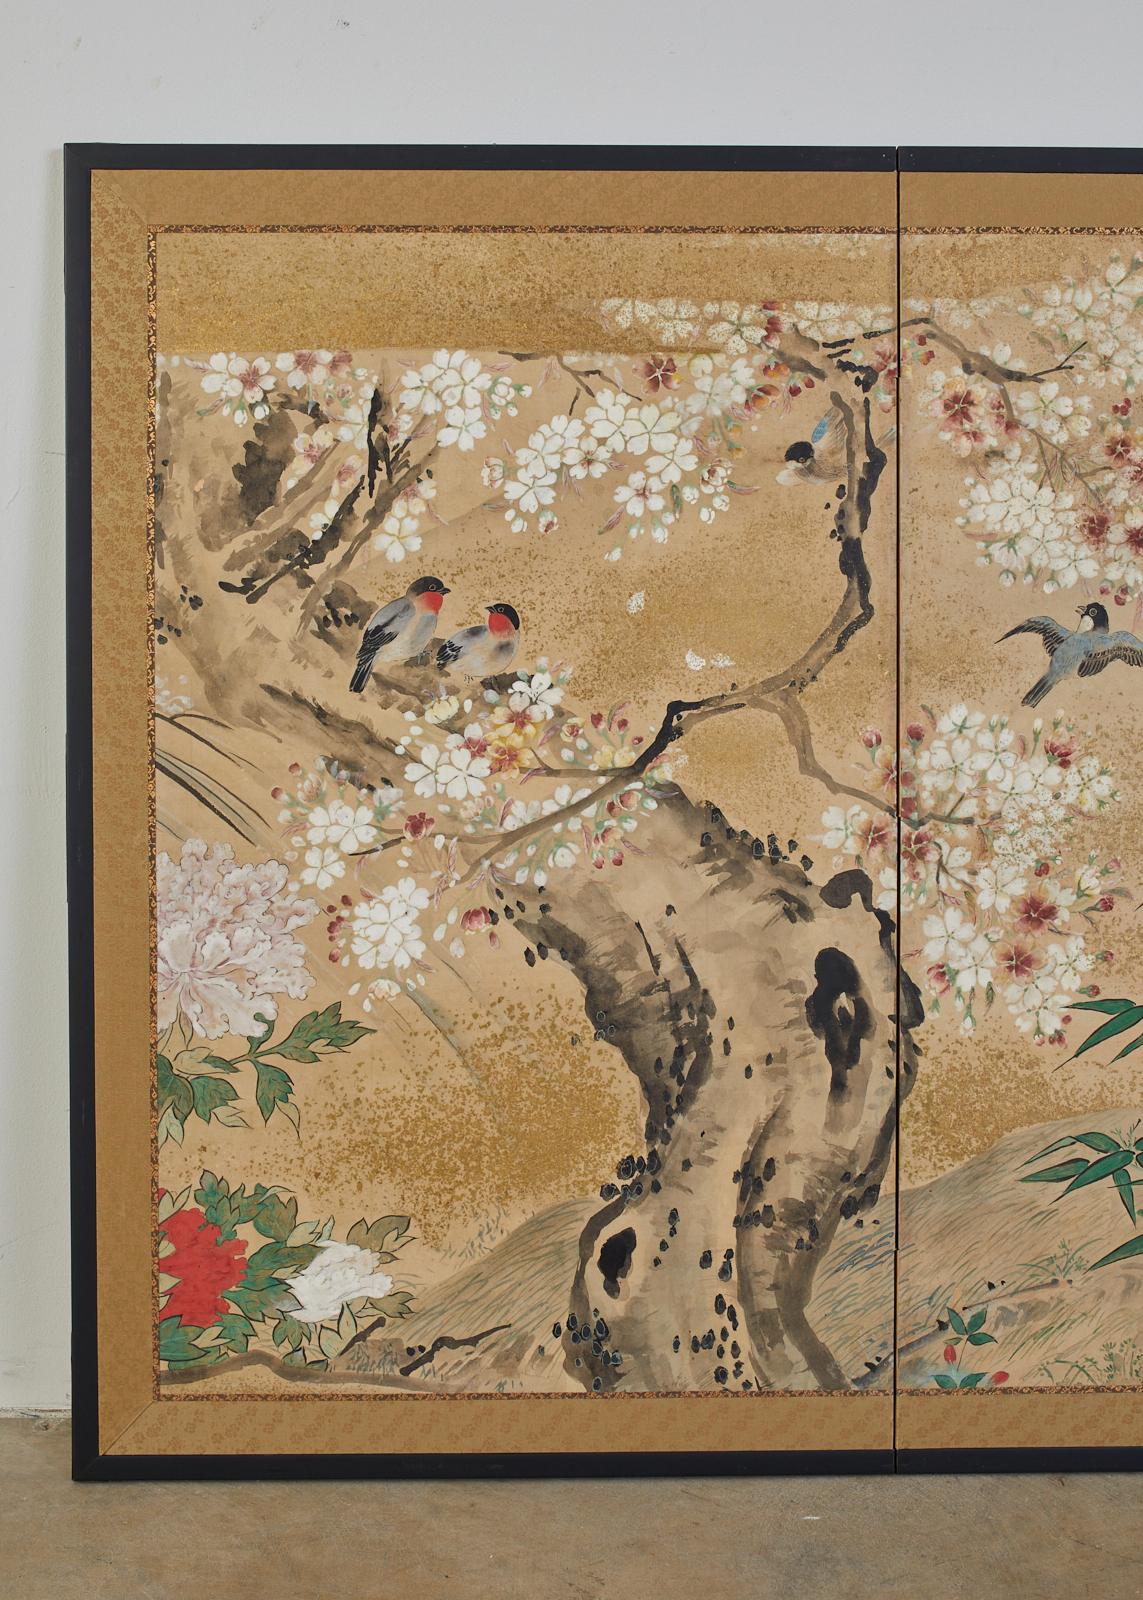 Exceptional Japanese Meiji period two-panel screen, circa 1900. Featuring songbirds amid sakura cherry trees and flowering peony. Made in the Nihonga School style on handcrafted mulberry paper. Ink and natural pigments with gold flecks decorate the